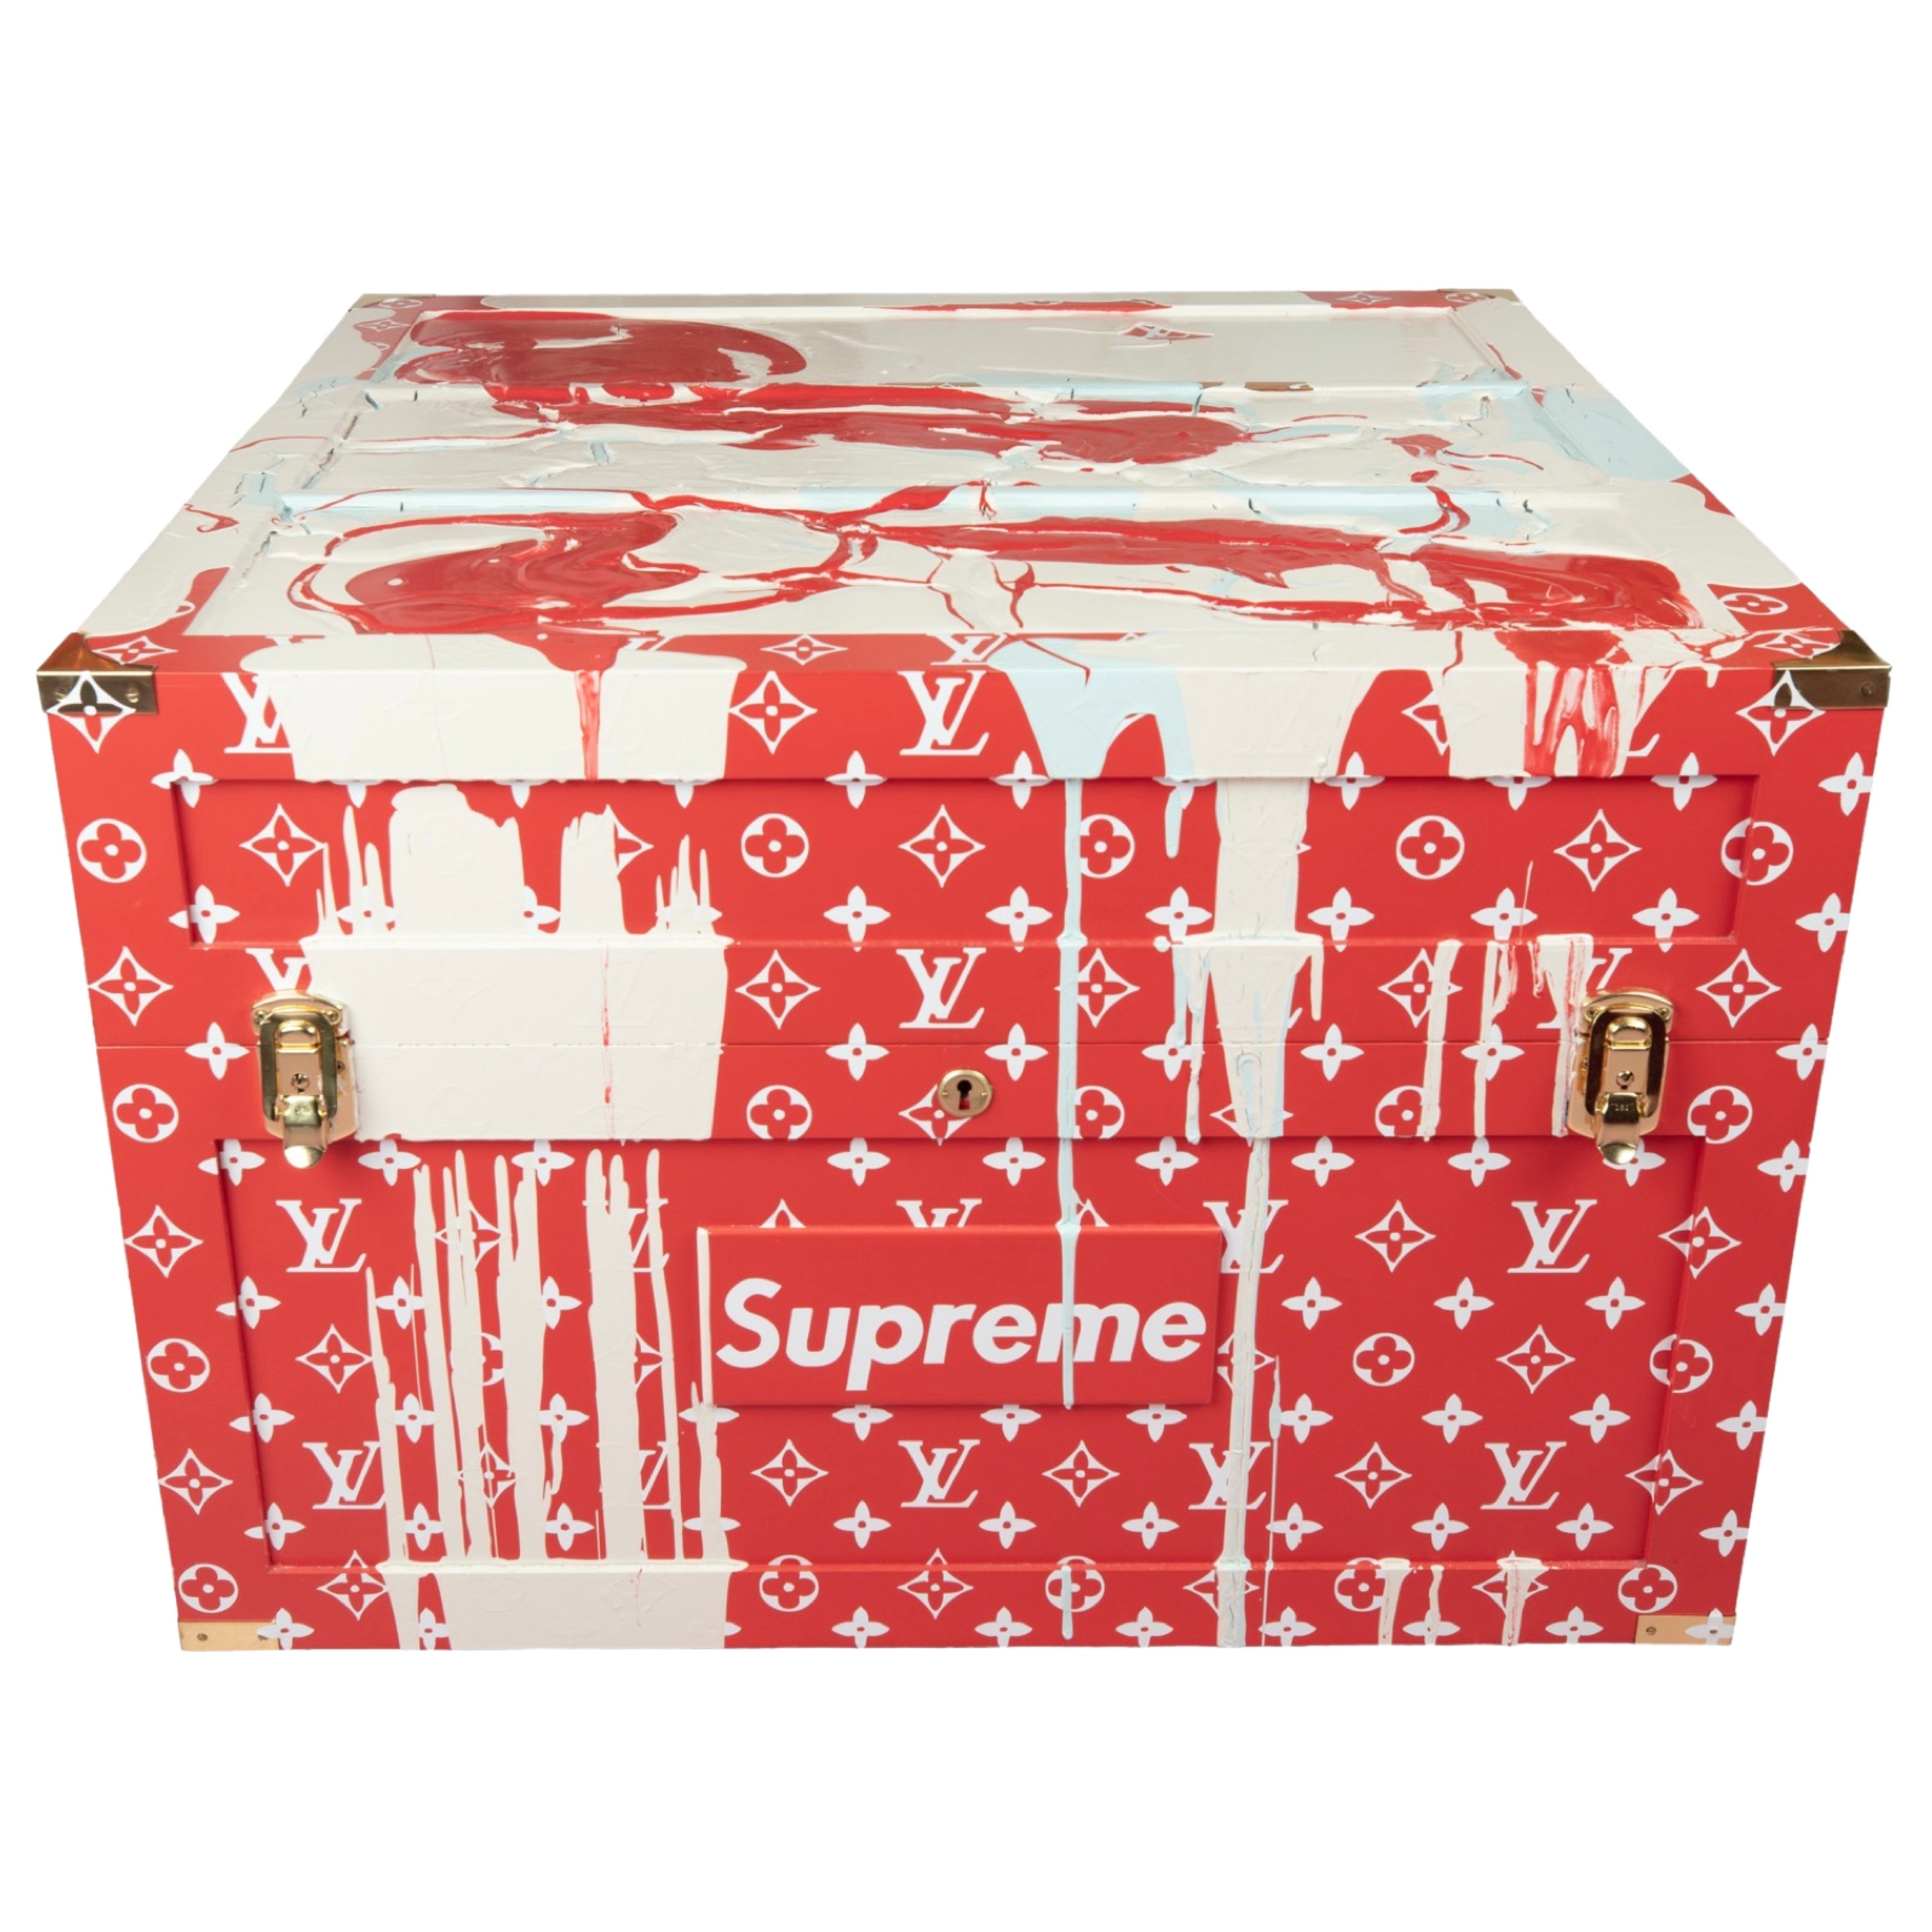 Red Louis Vuitton Supreme Trunk with Paint Drip